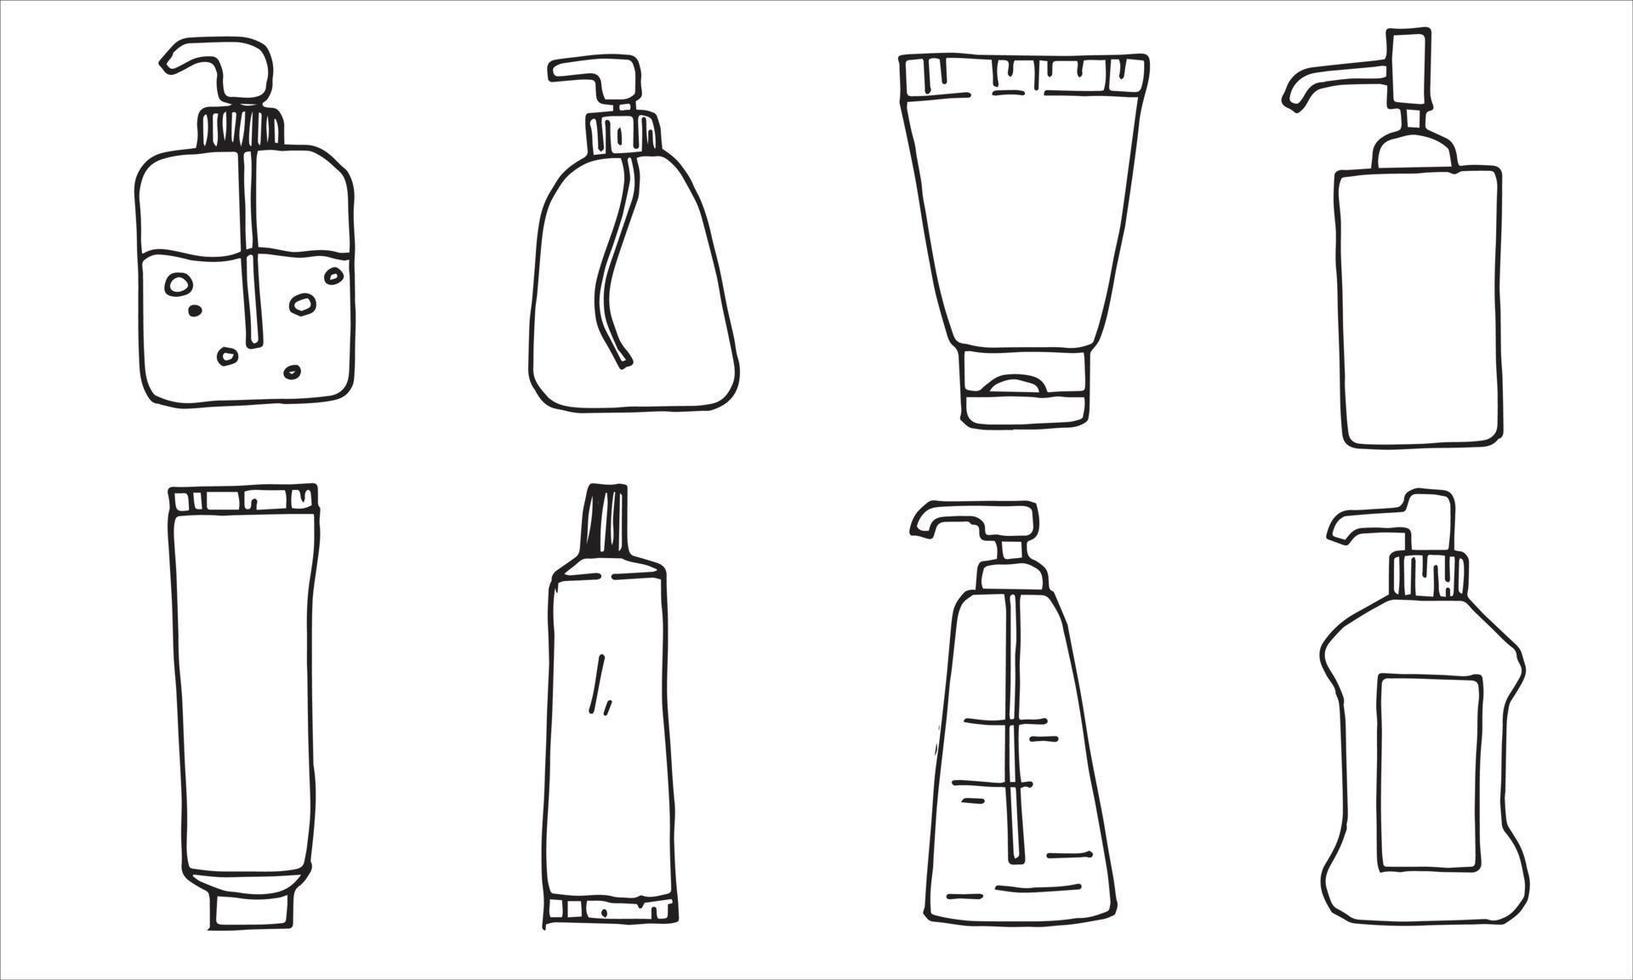 illustration in doodle style. a set of dispensers, cans, tubes with sanitary products, sanitizers. hygiene and sanitation items. simple line drawing clipart isolated on white background vector